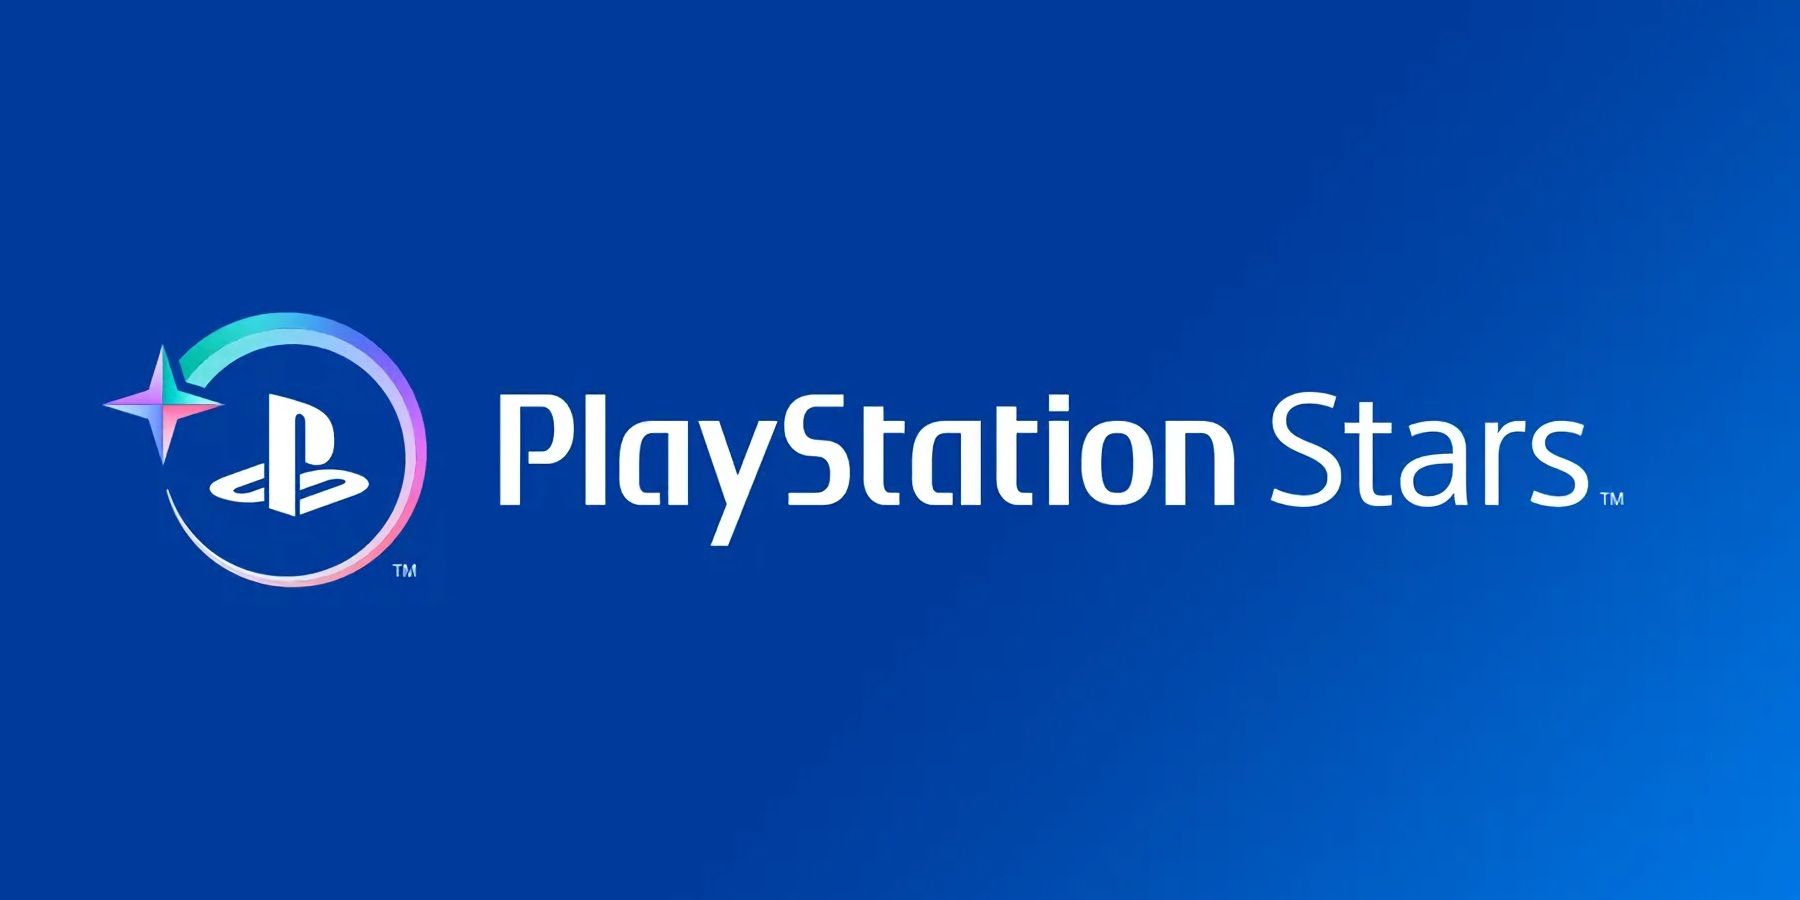 PlayStation-Stars-Official-Logo-Reveal-Showcase